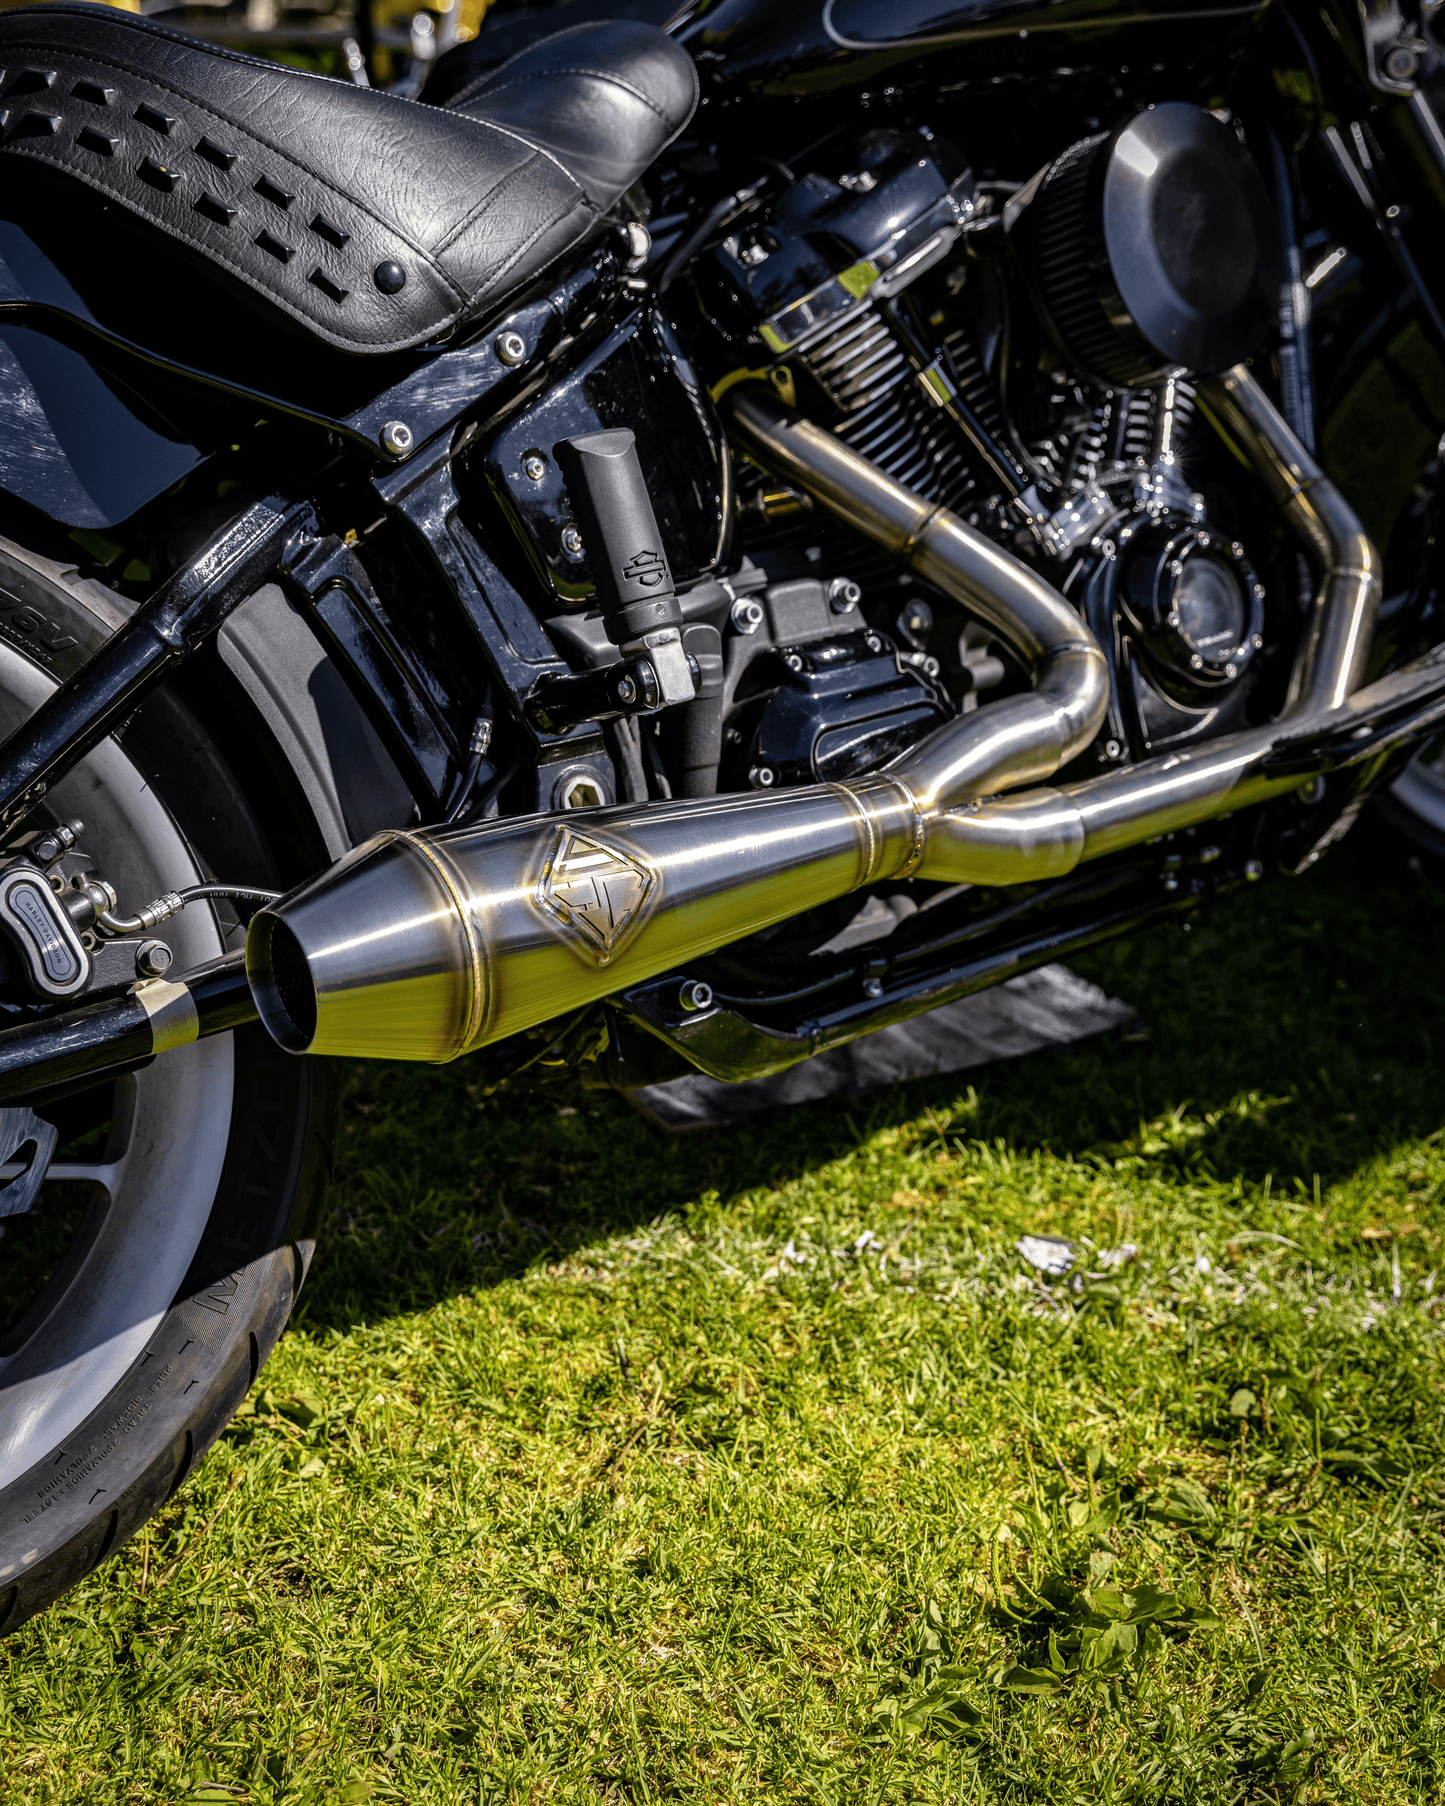 M8 Softail Harley Davidson Motorcycle with Big Bore Exhaust